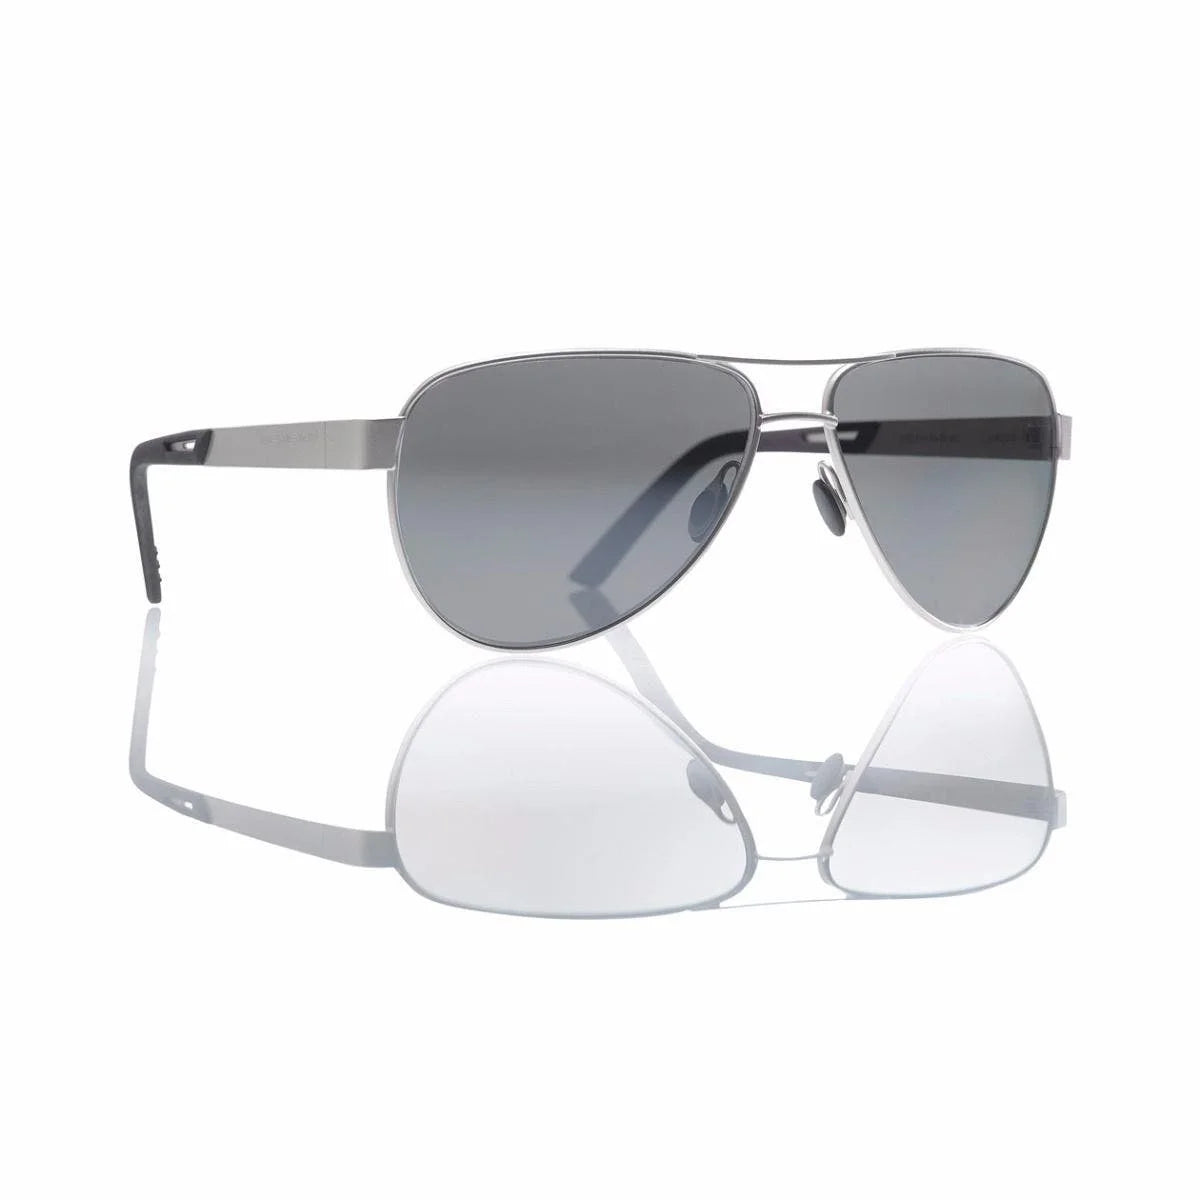 Revision Alphawing Sunglasses